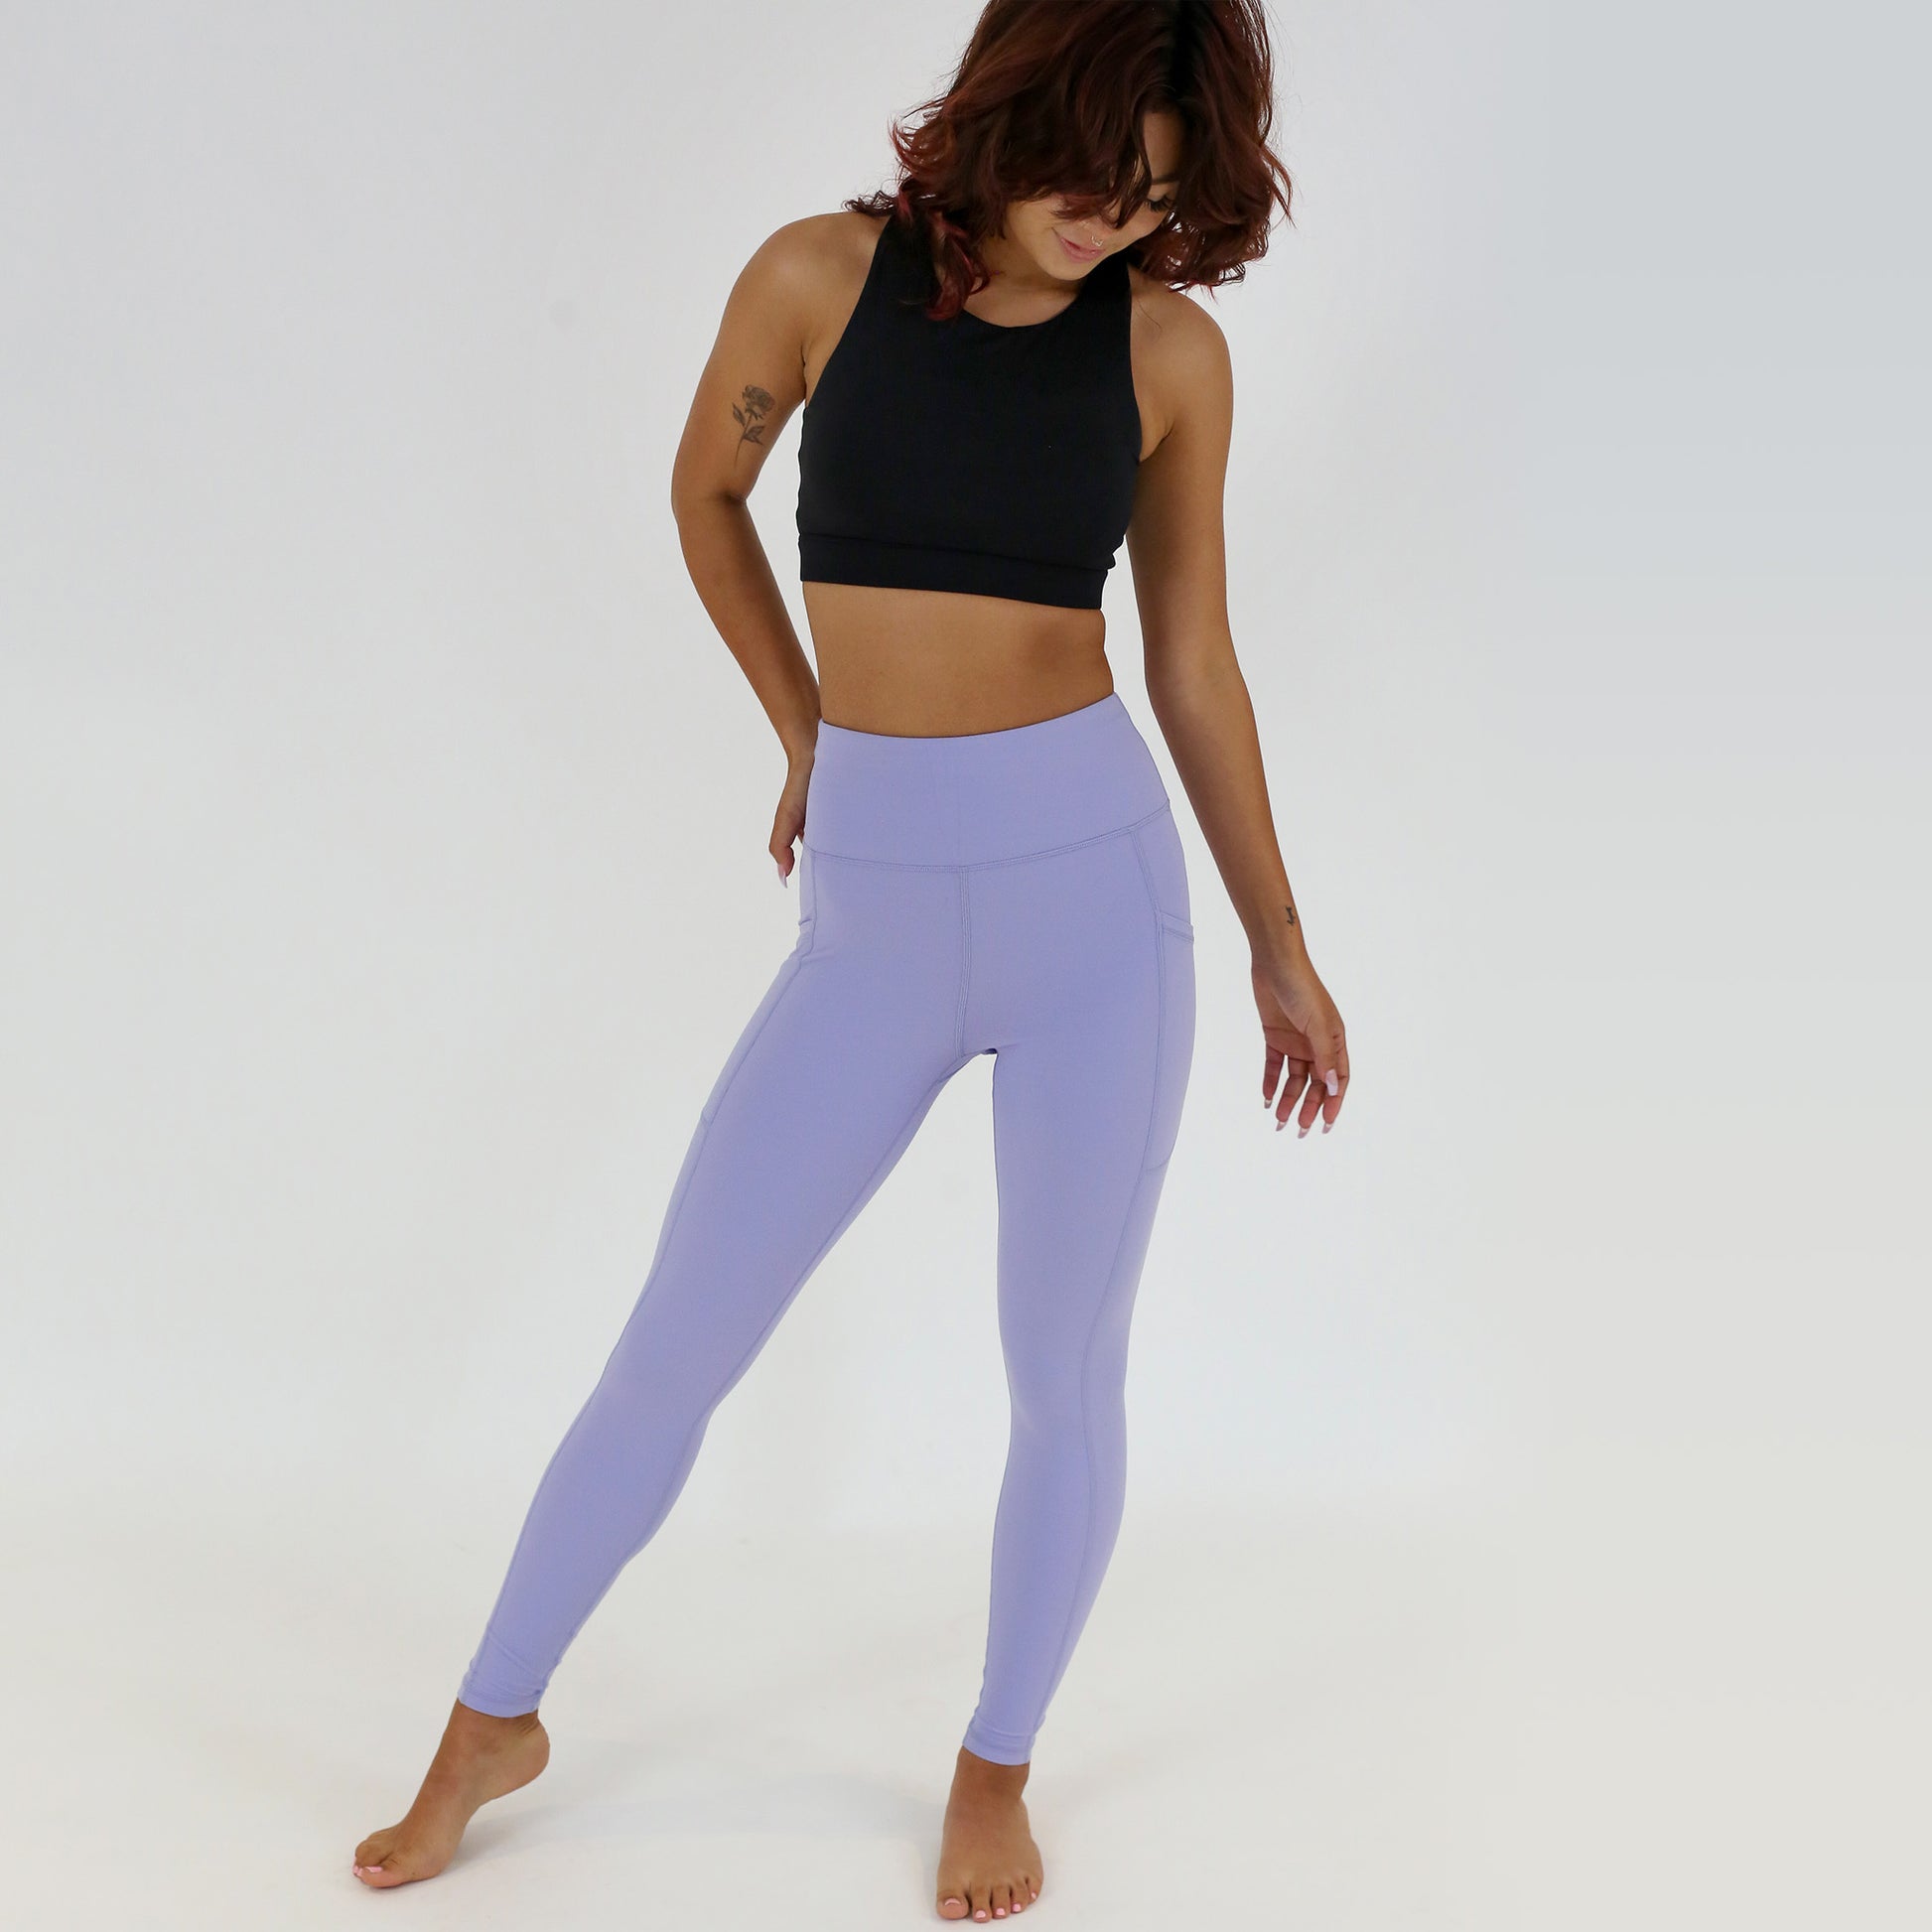 Women's Effortless Support High-Rise 7/8 Leggings - All In Motion™ Lilac  Purple 3X